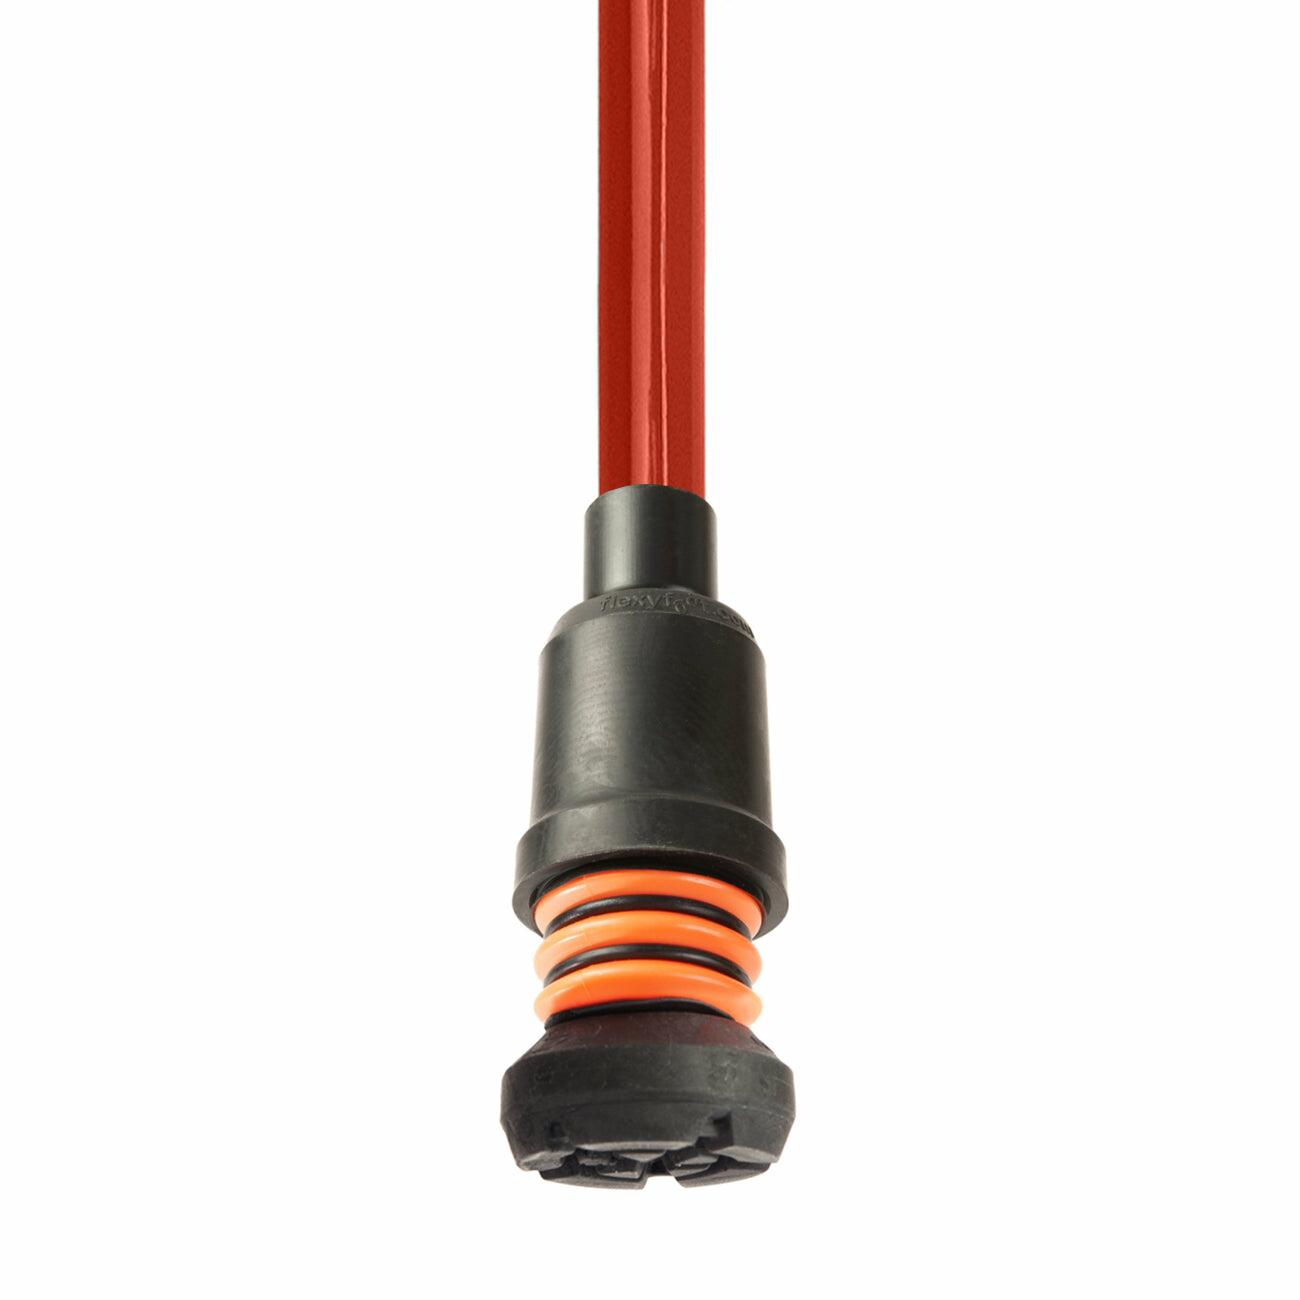 A red Flexyfoot Comfort Grip Double Adjustable Crutch tipped with a Flexyfoot ferrule